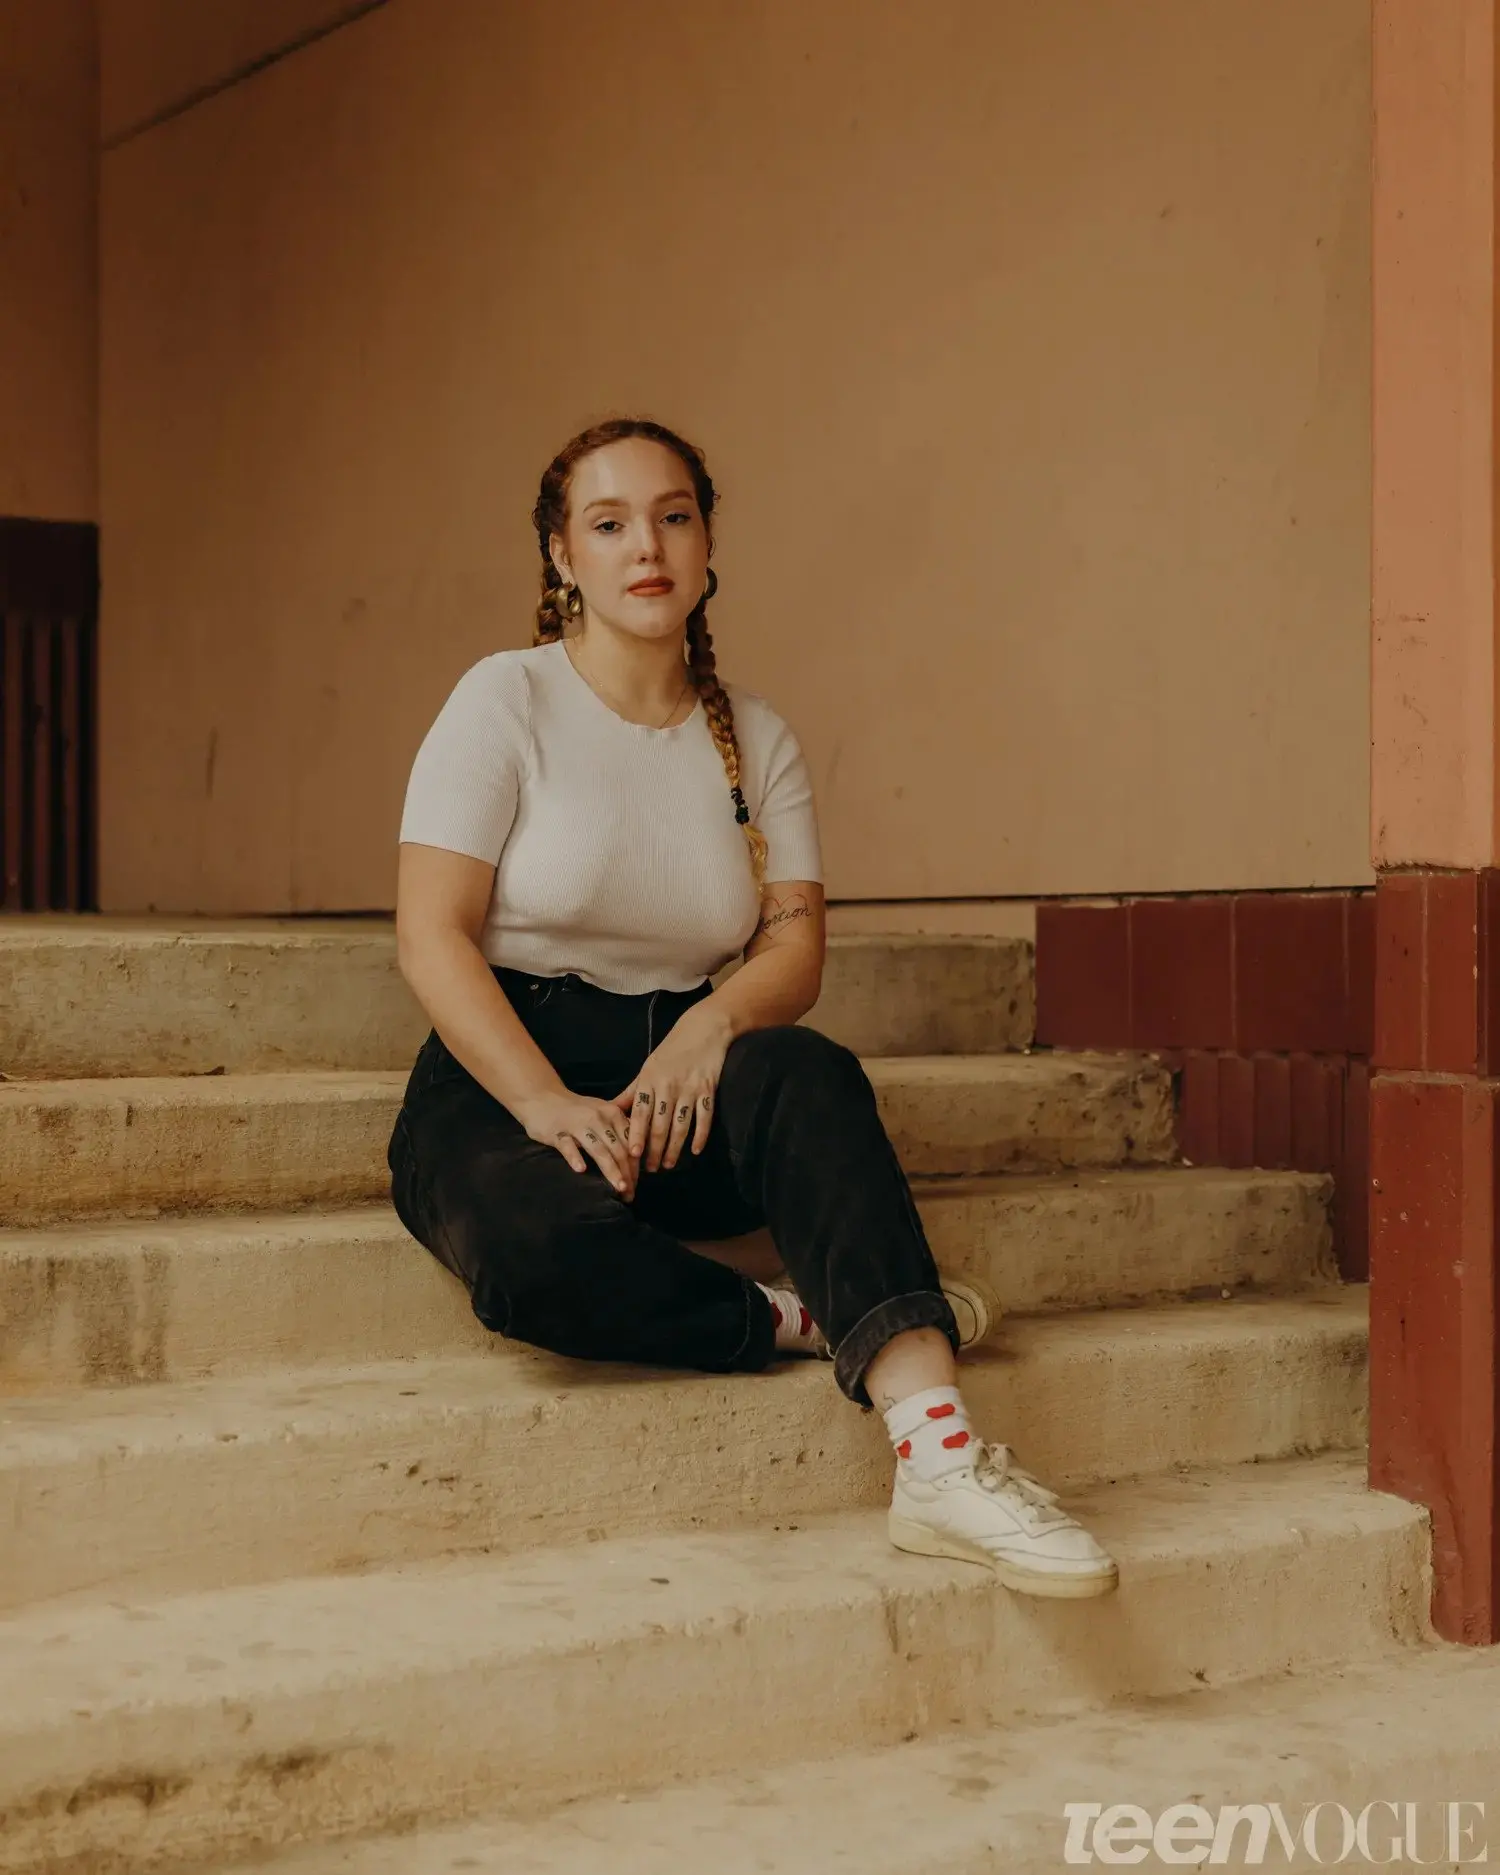 A girl in a white tee shirt and jeans sits on the steps of building.